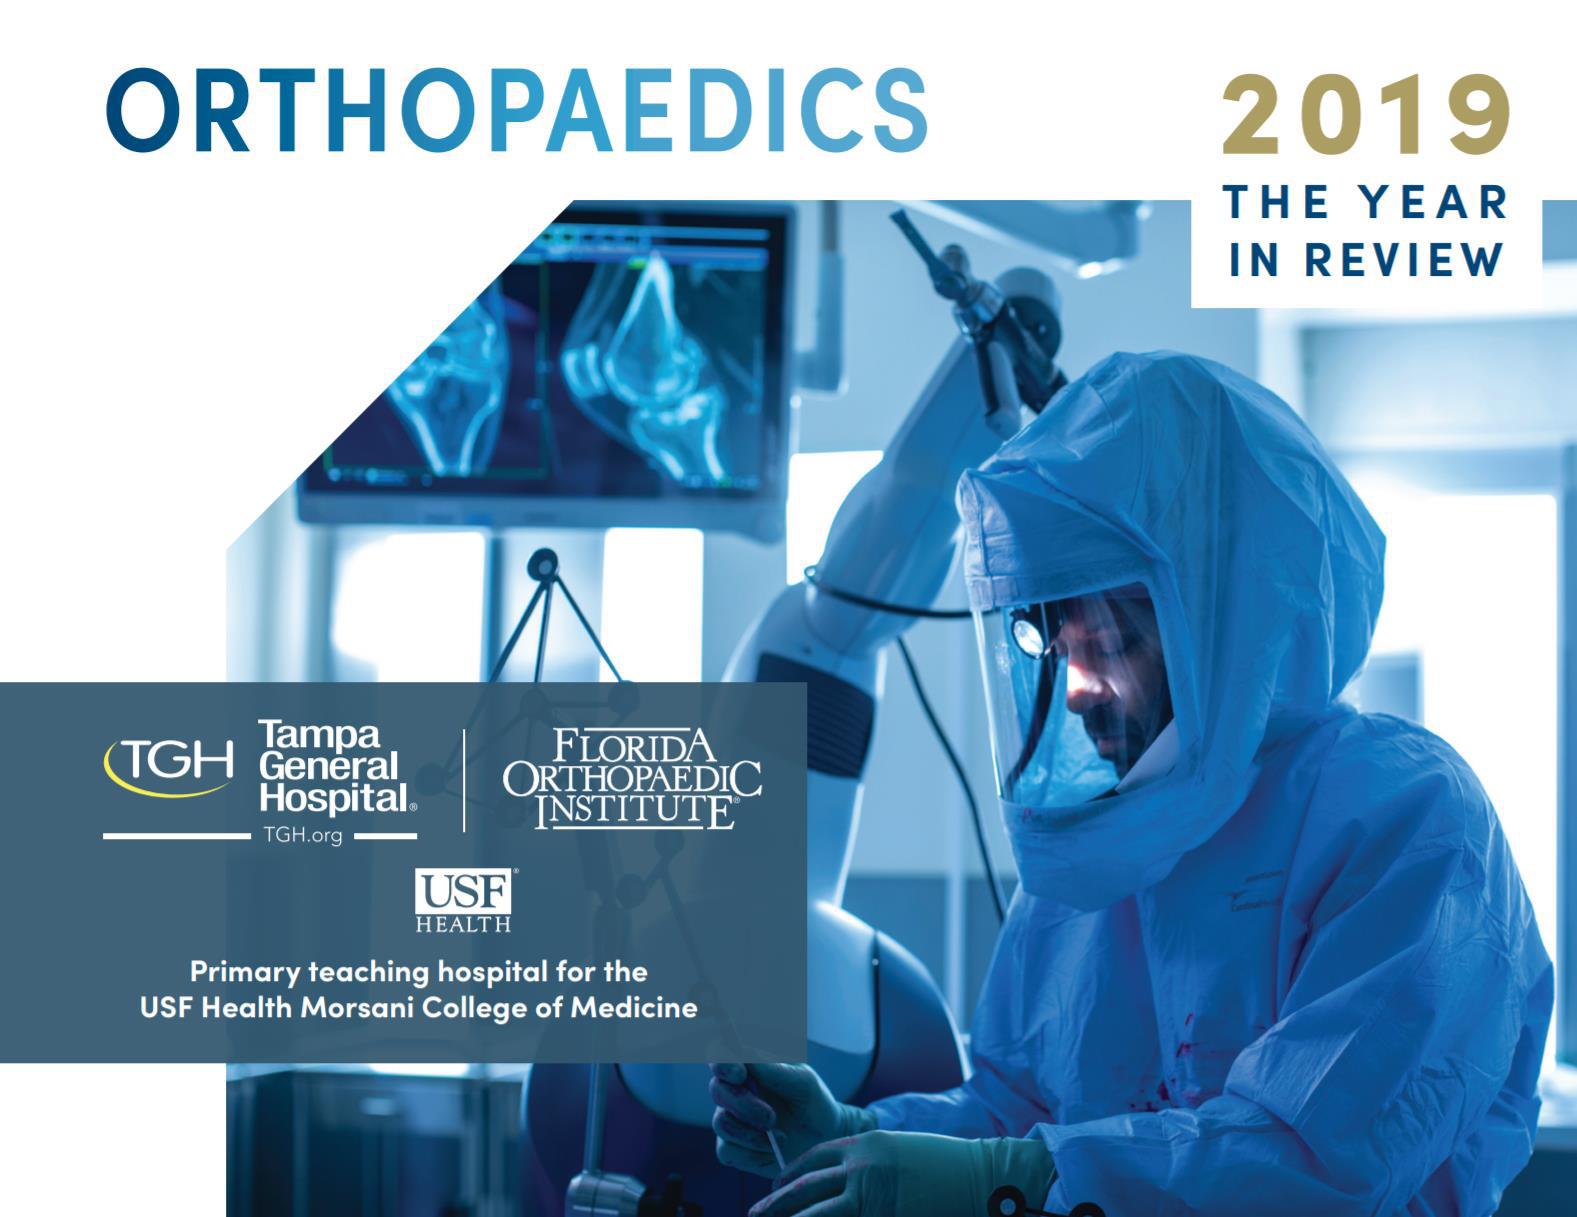 ORTHOPAEDICS 2019 THE YEAR IN REVIEW